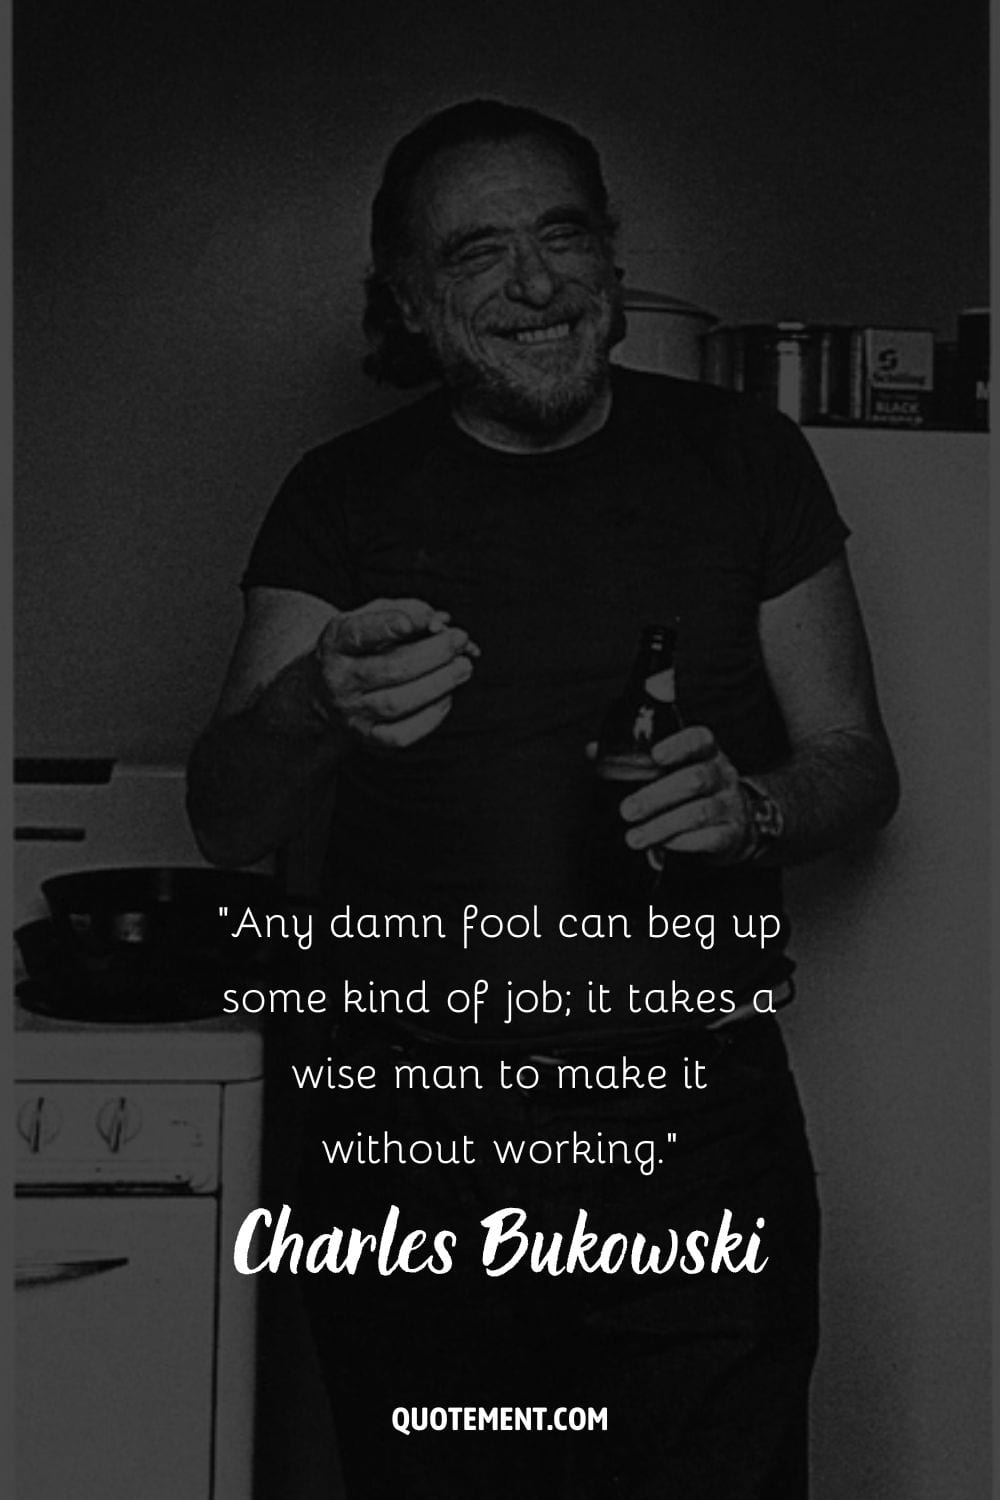 shot of Charles Bukowski in the kitchen with his vices